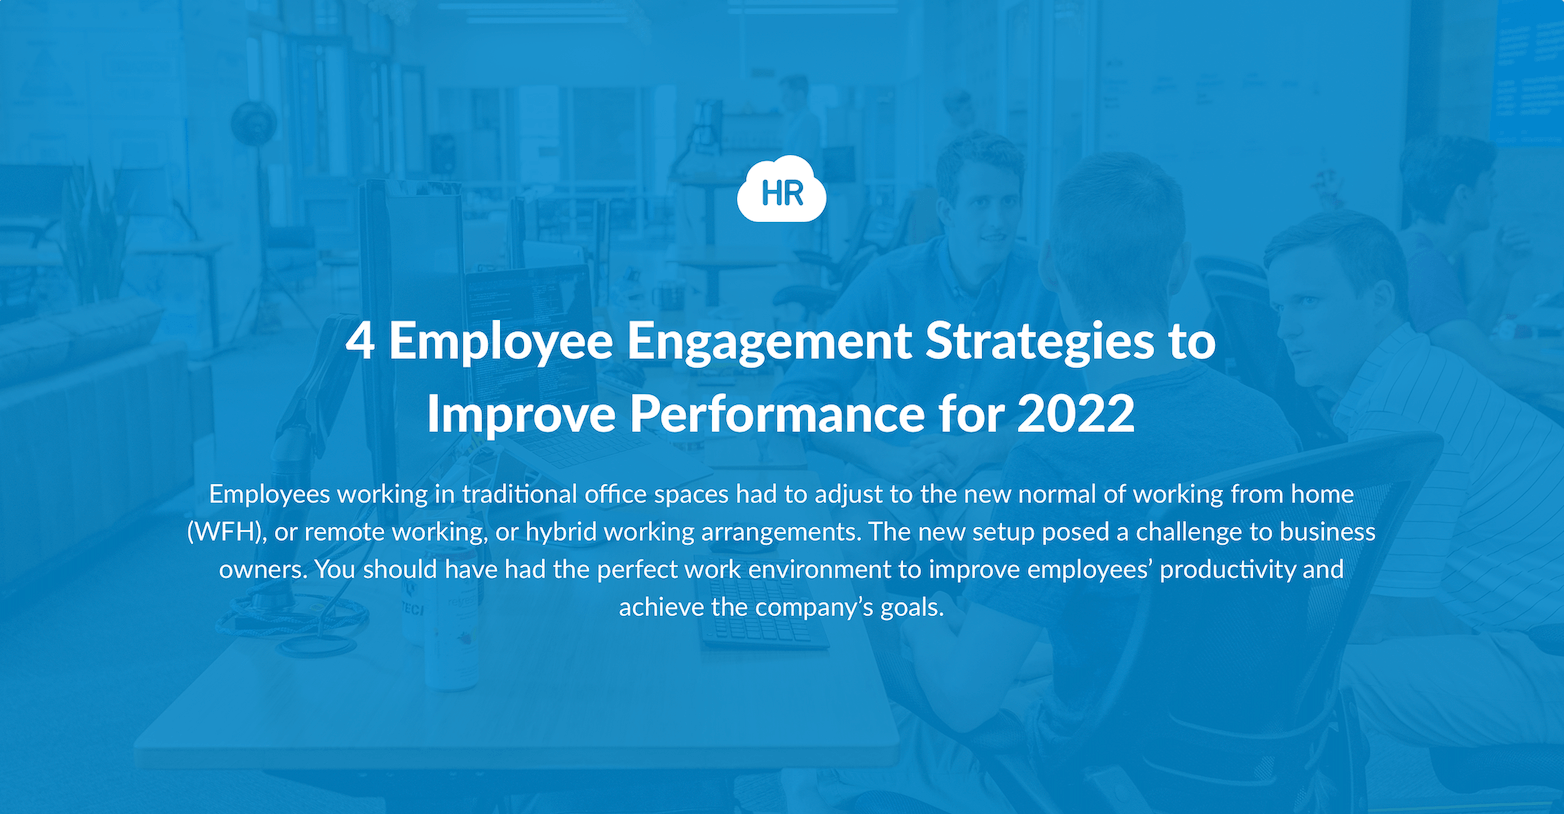 4 Employee Engagement Strategies to Improve Performance for 2022